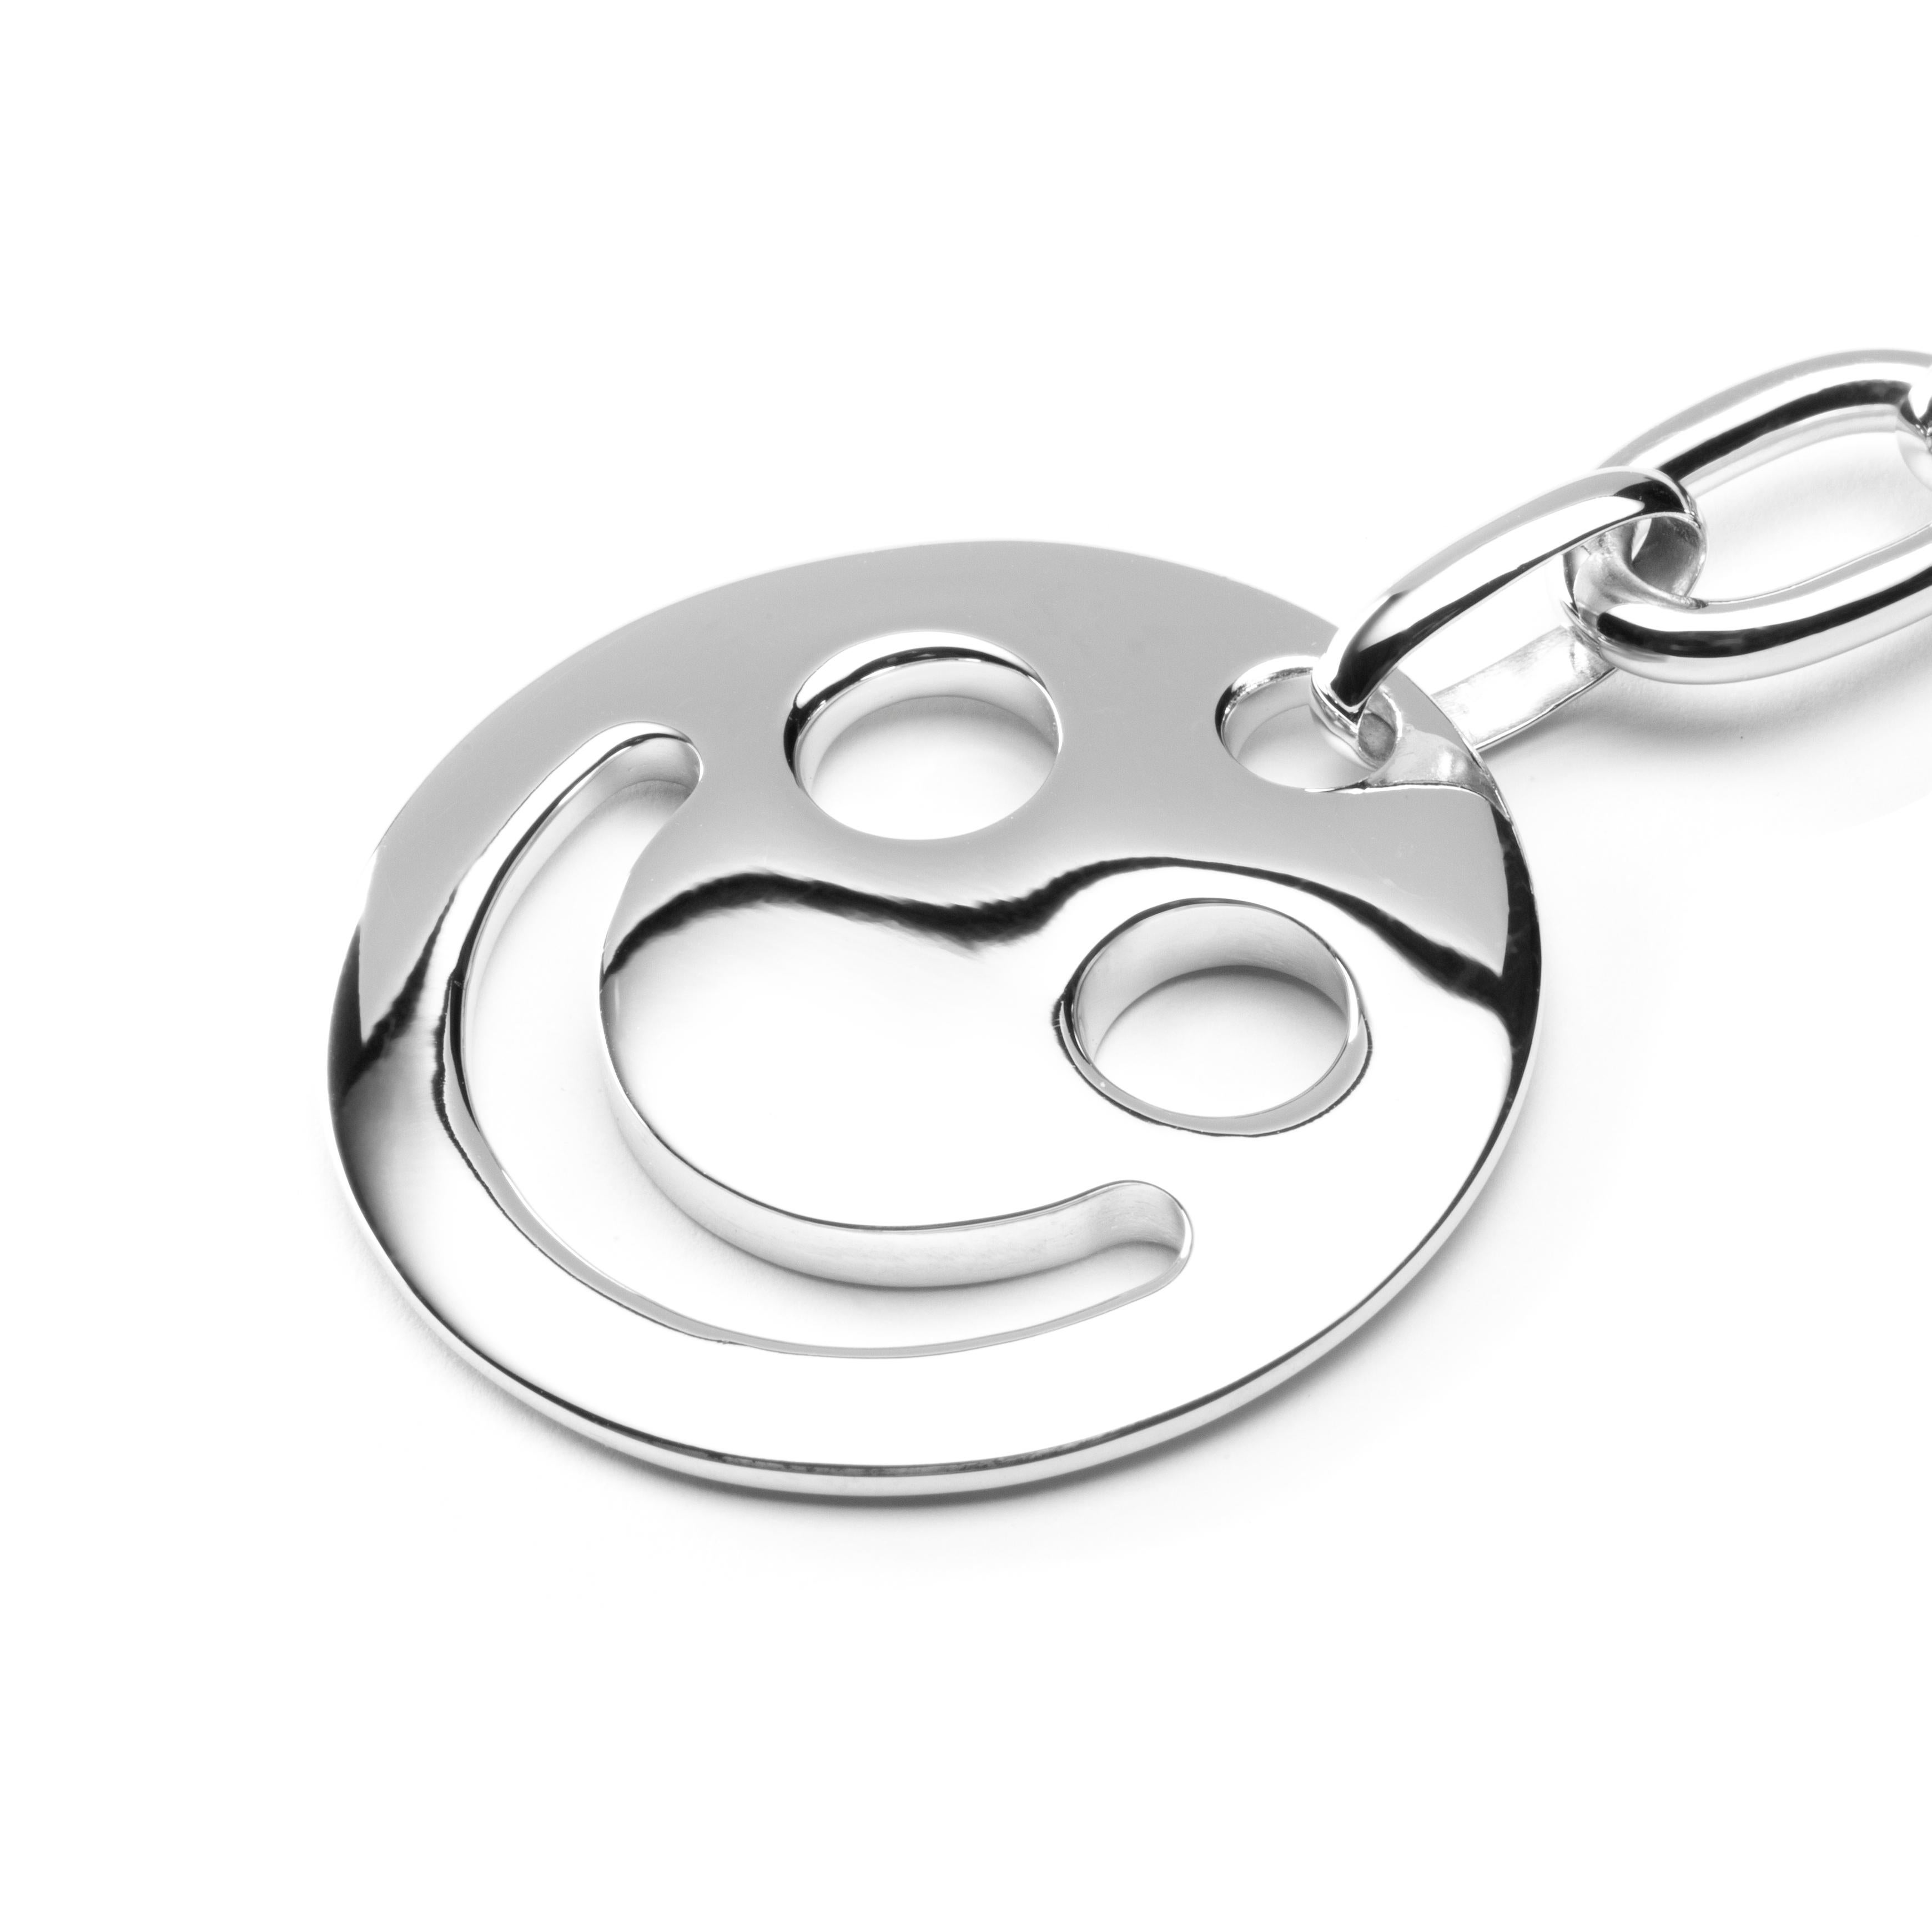 Alex Jona design collection, hand crafted in Italy, rhodium plated Smile Sterling Silver key holder. Dimensions: Diameter: 1.39 in/3.53 mm

Alex Jona gifts stand out, not only for their special design and for the excellent quality, but also for the